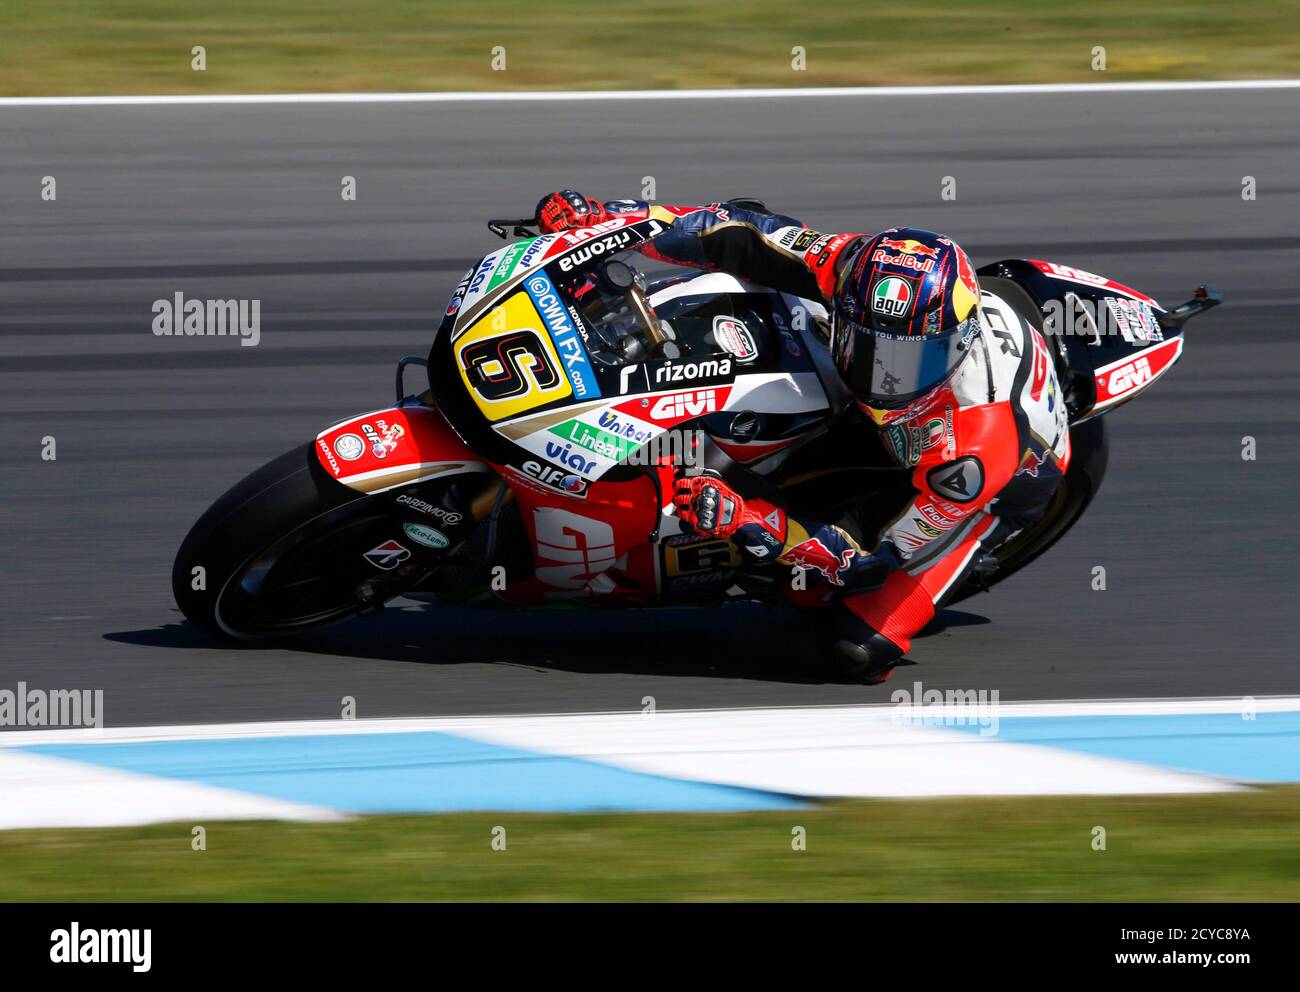 Lcr honda motogp rider hi-res stock photography and images - Alamy